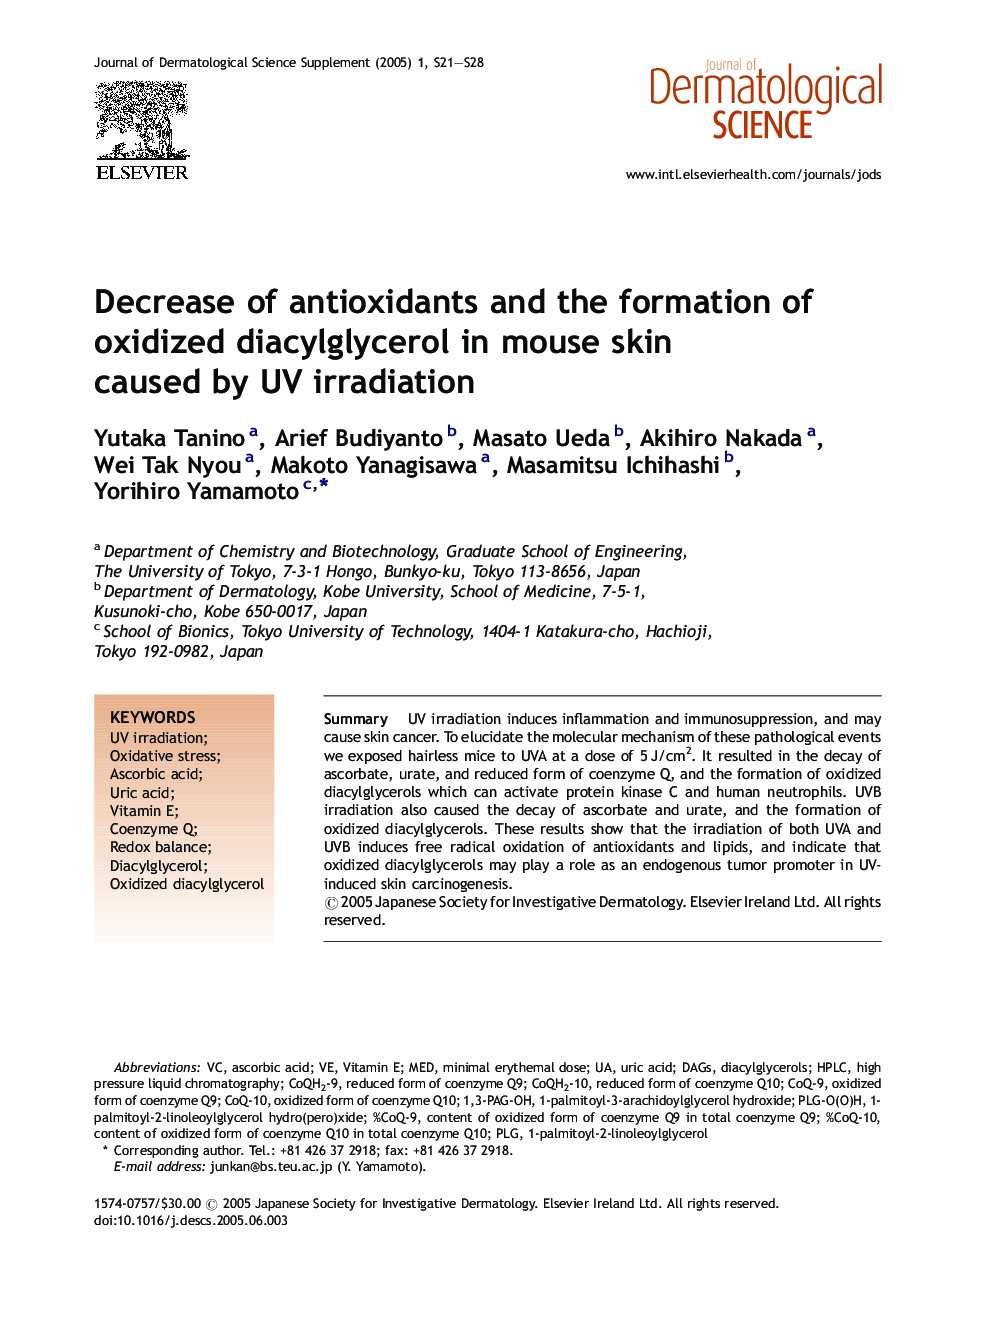 Decrease of antioxidants and the formation of oxidized diacylglycerol in mouse skin caused by UV irradiation